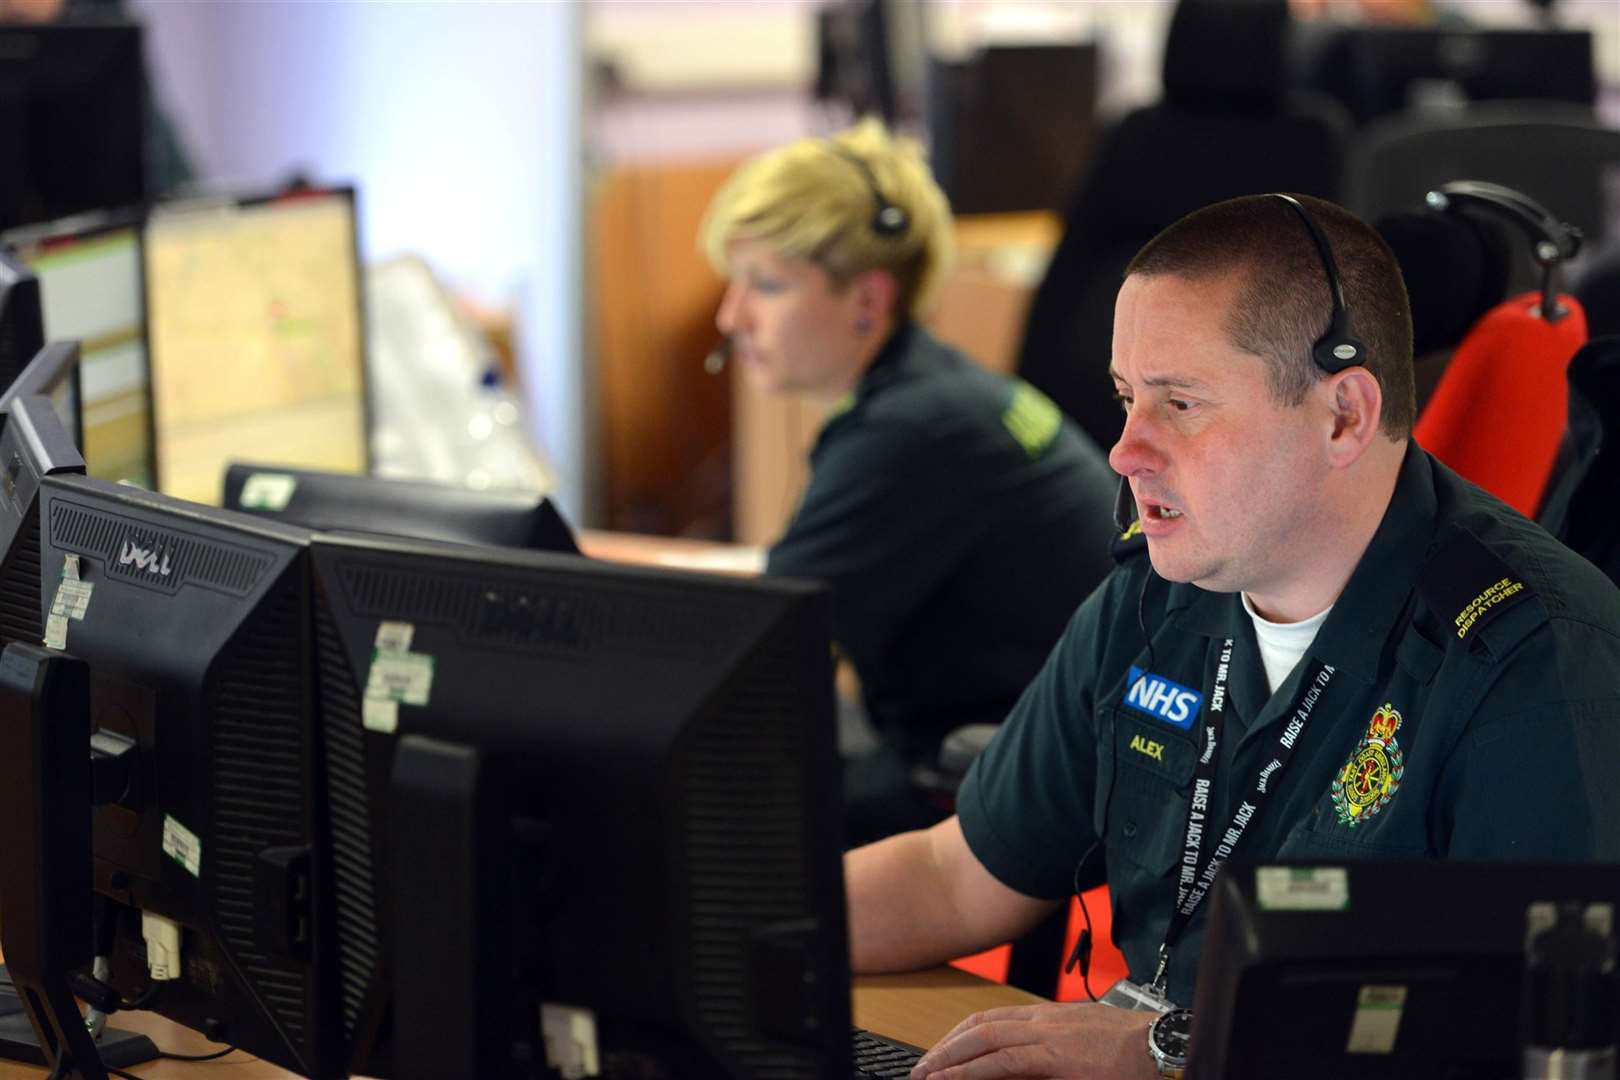 New Year's Eve is one of the busiest nights of the year for the ambulance service